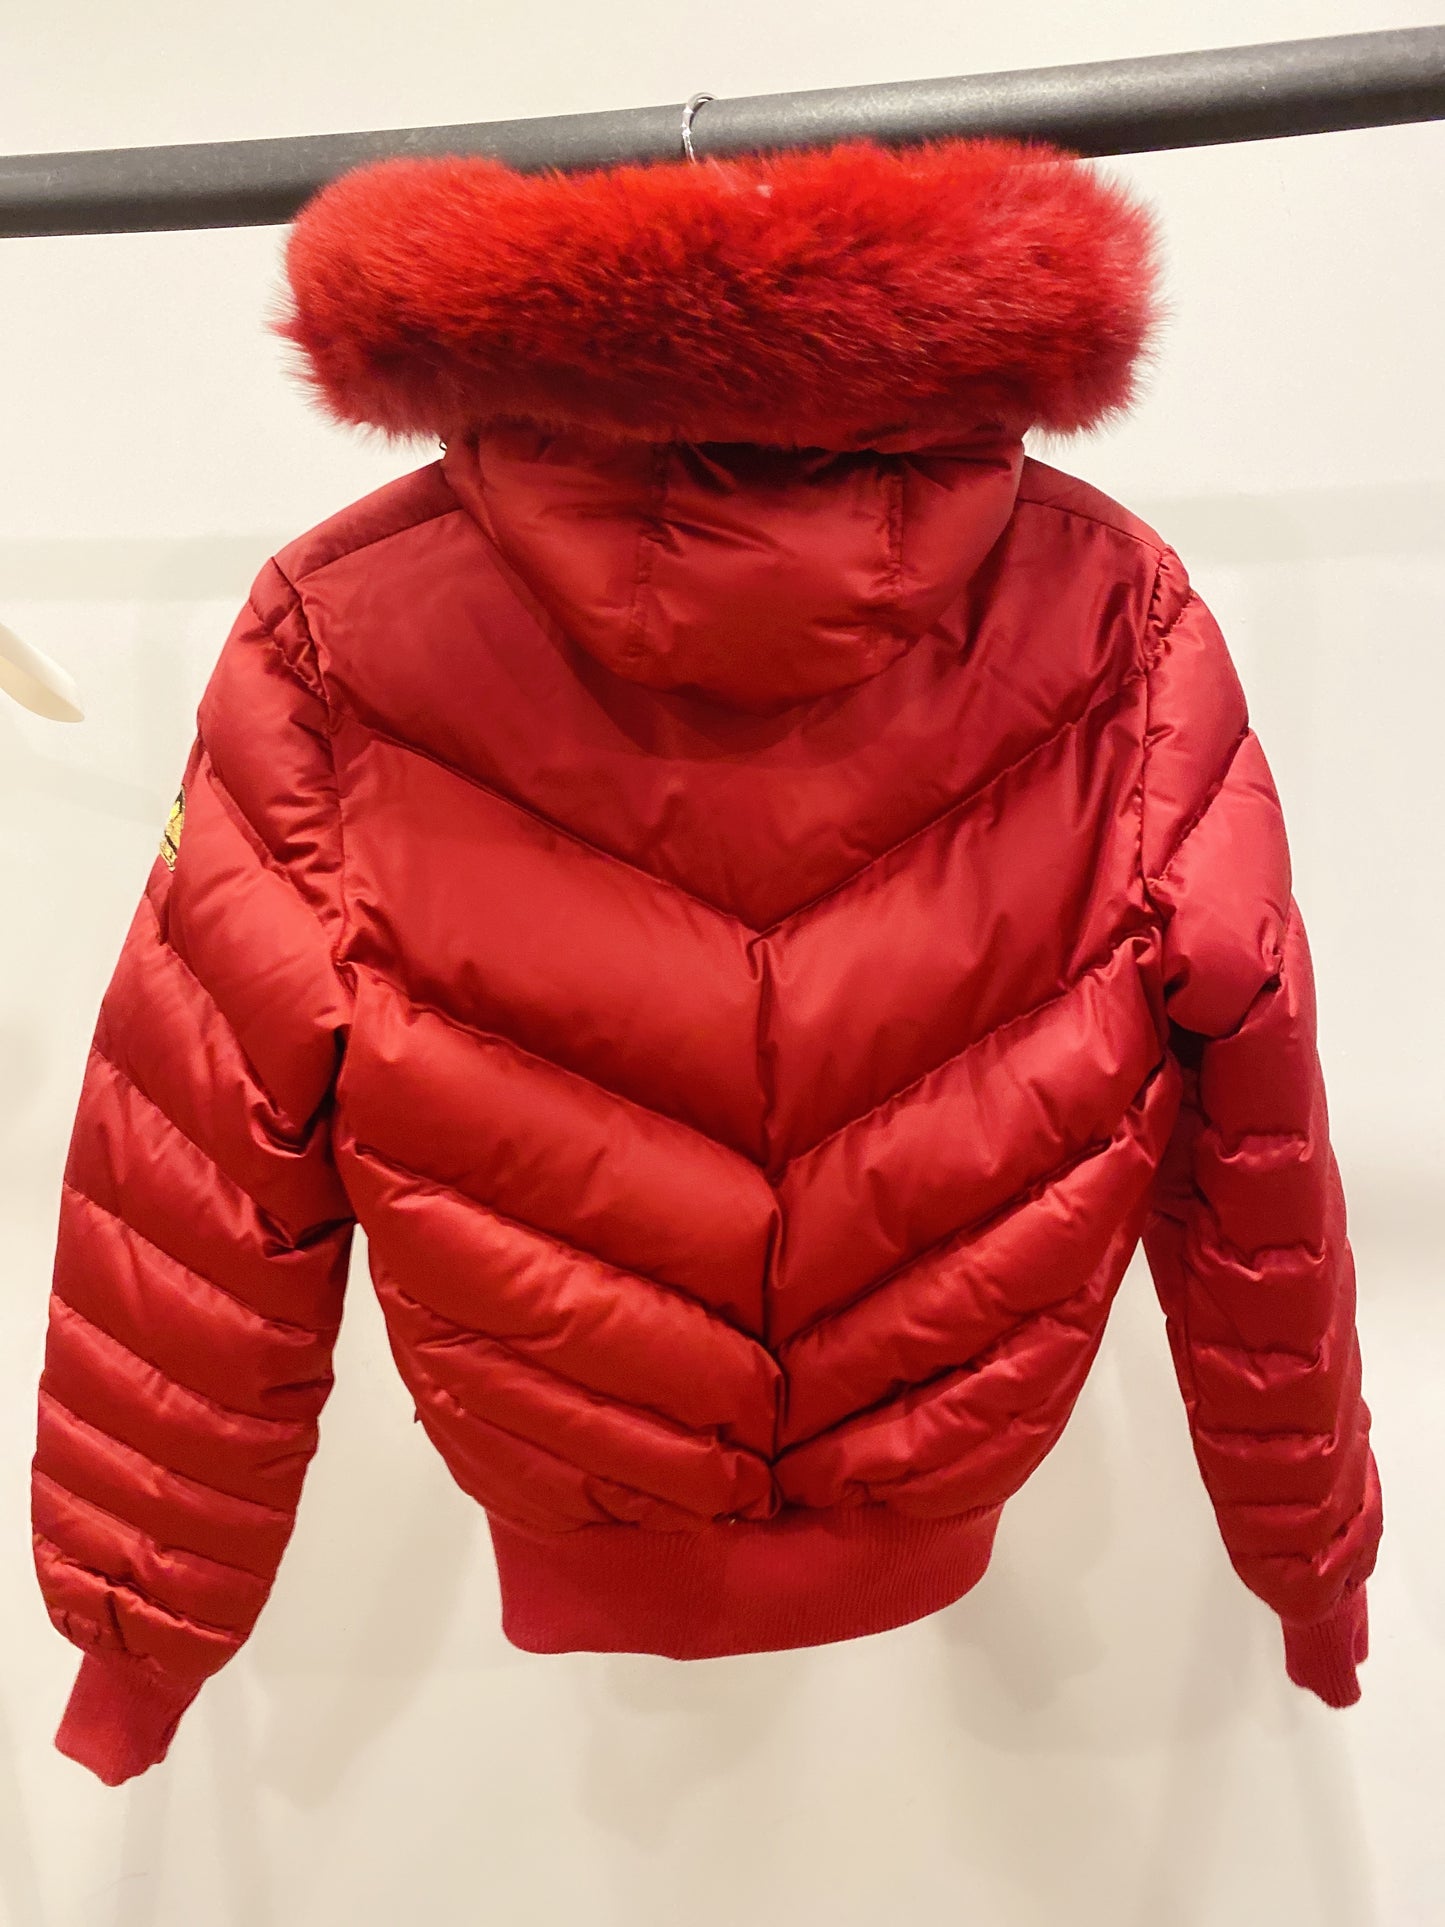 Clearance: Pyrenex Bomb Size38 Dark Red Real Fur New